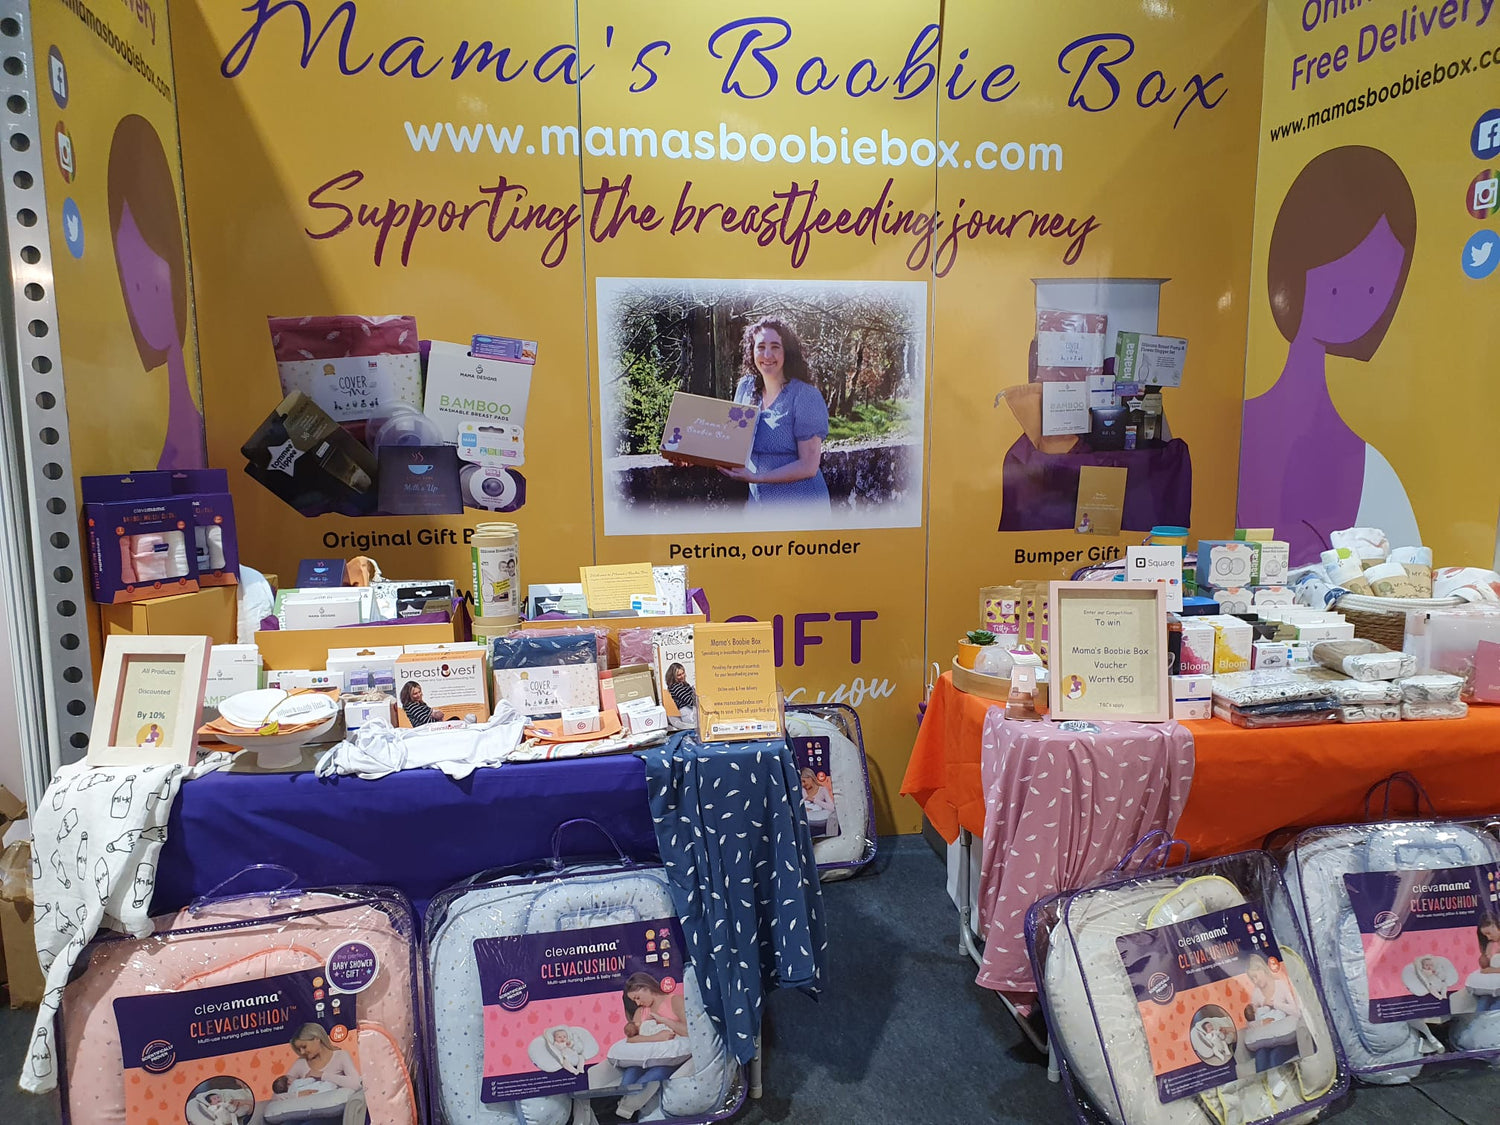 Mama's Boobie Box exhibiting at the RDS Pregnancy and Baby Fair